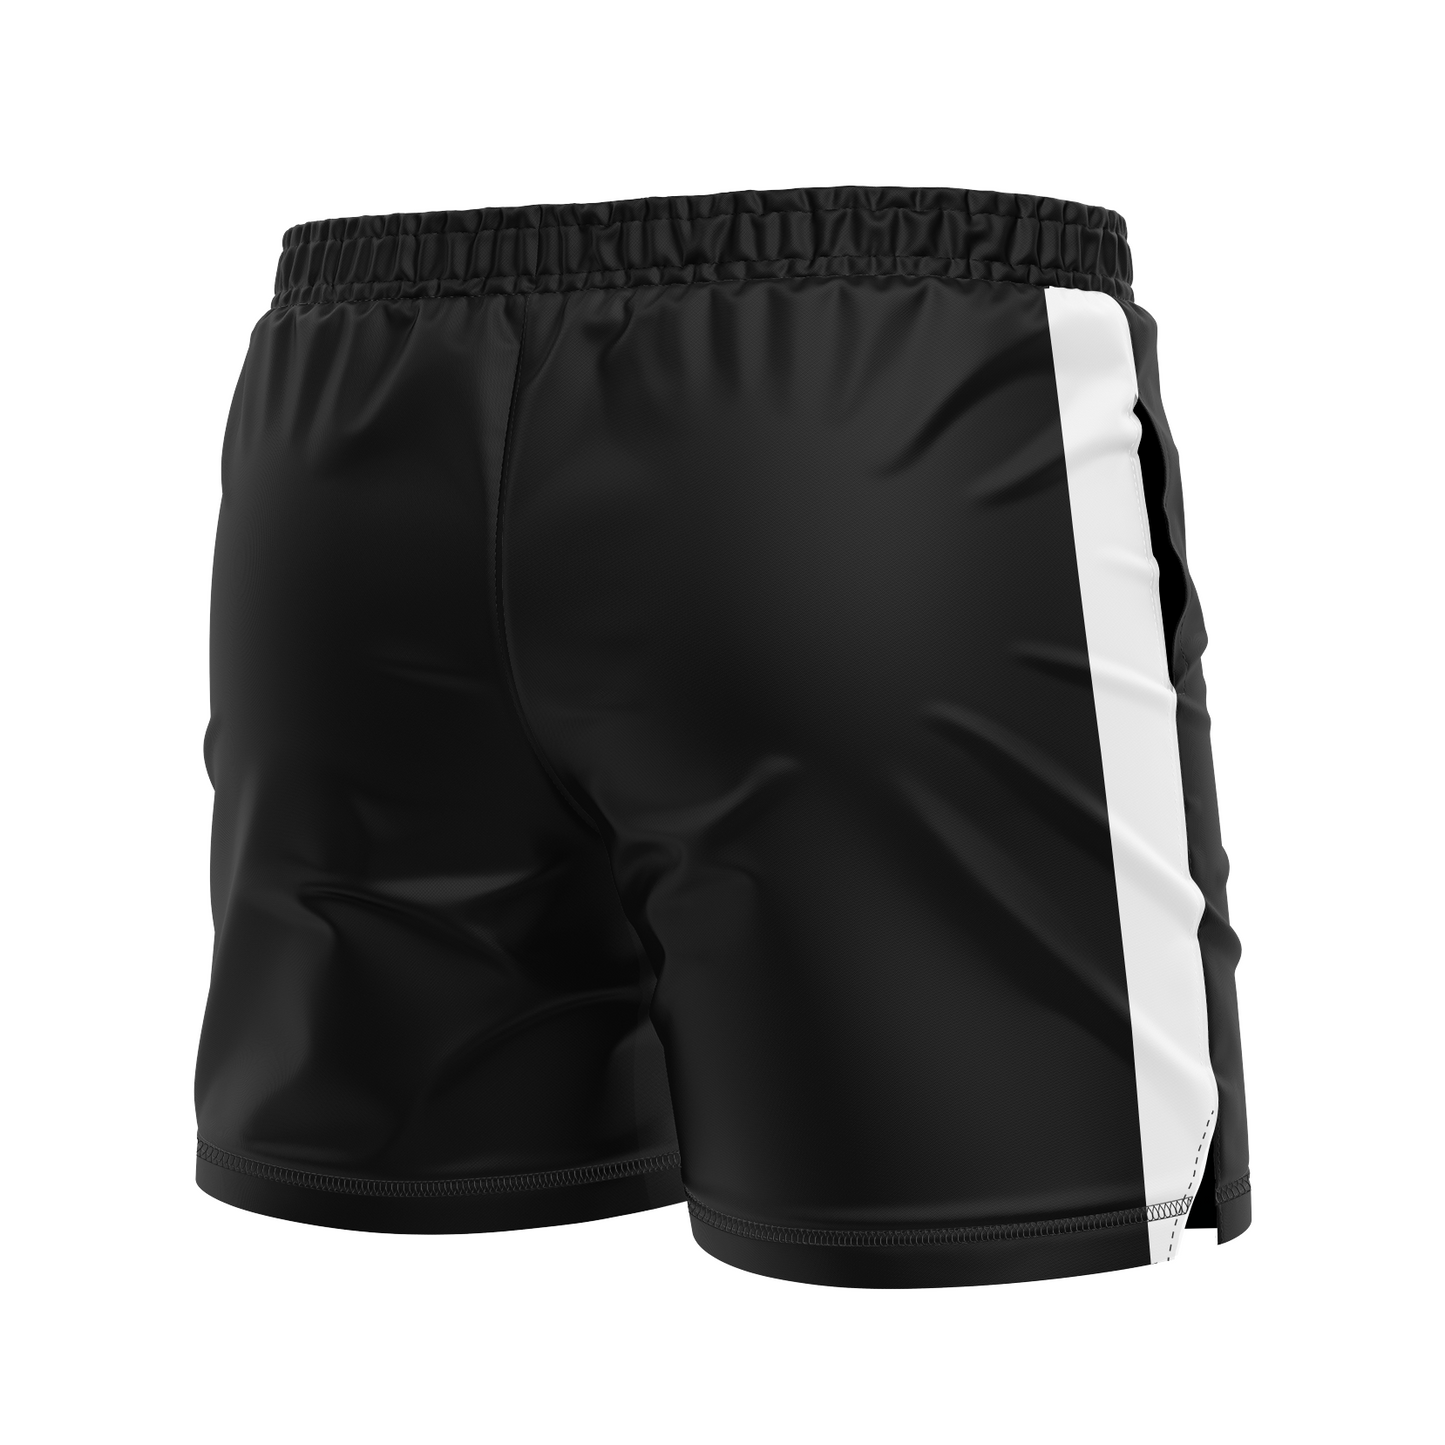 CCFC men's FC shorts Pile Drivers, black and yellow